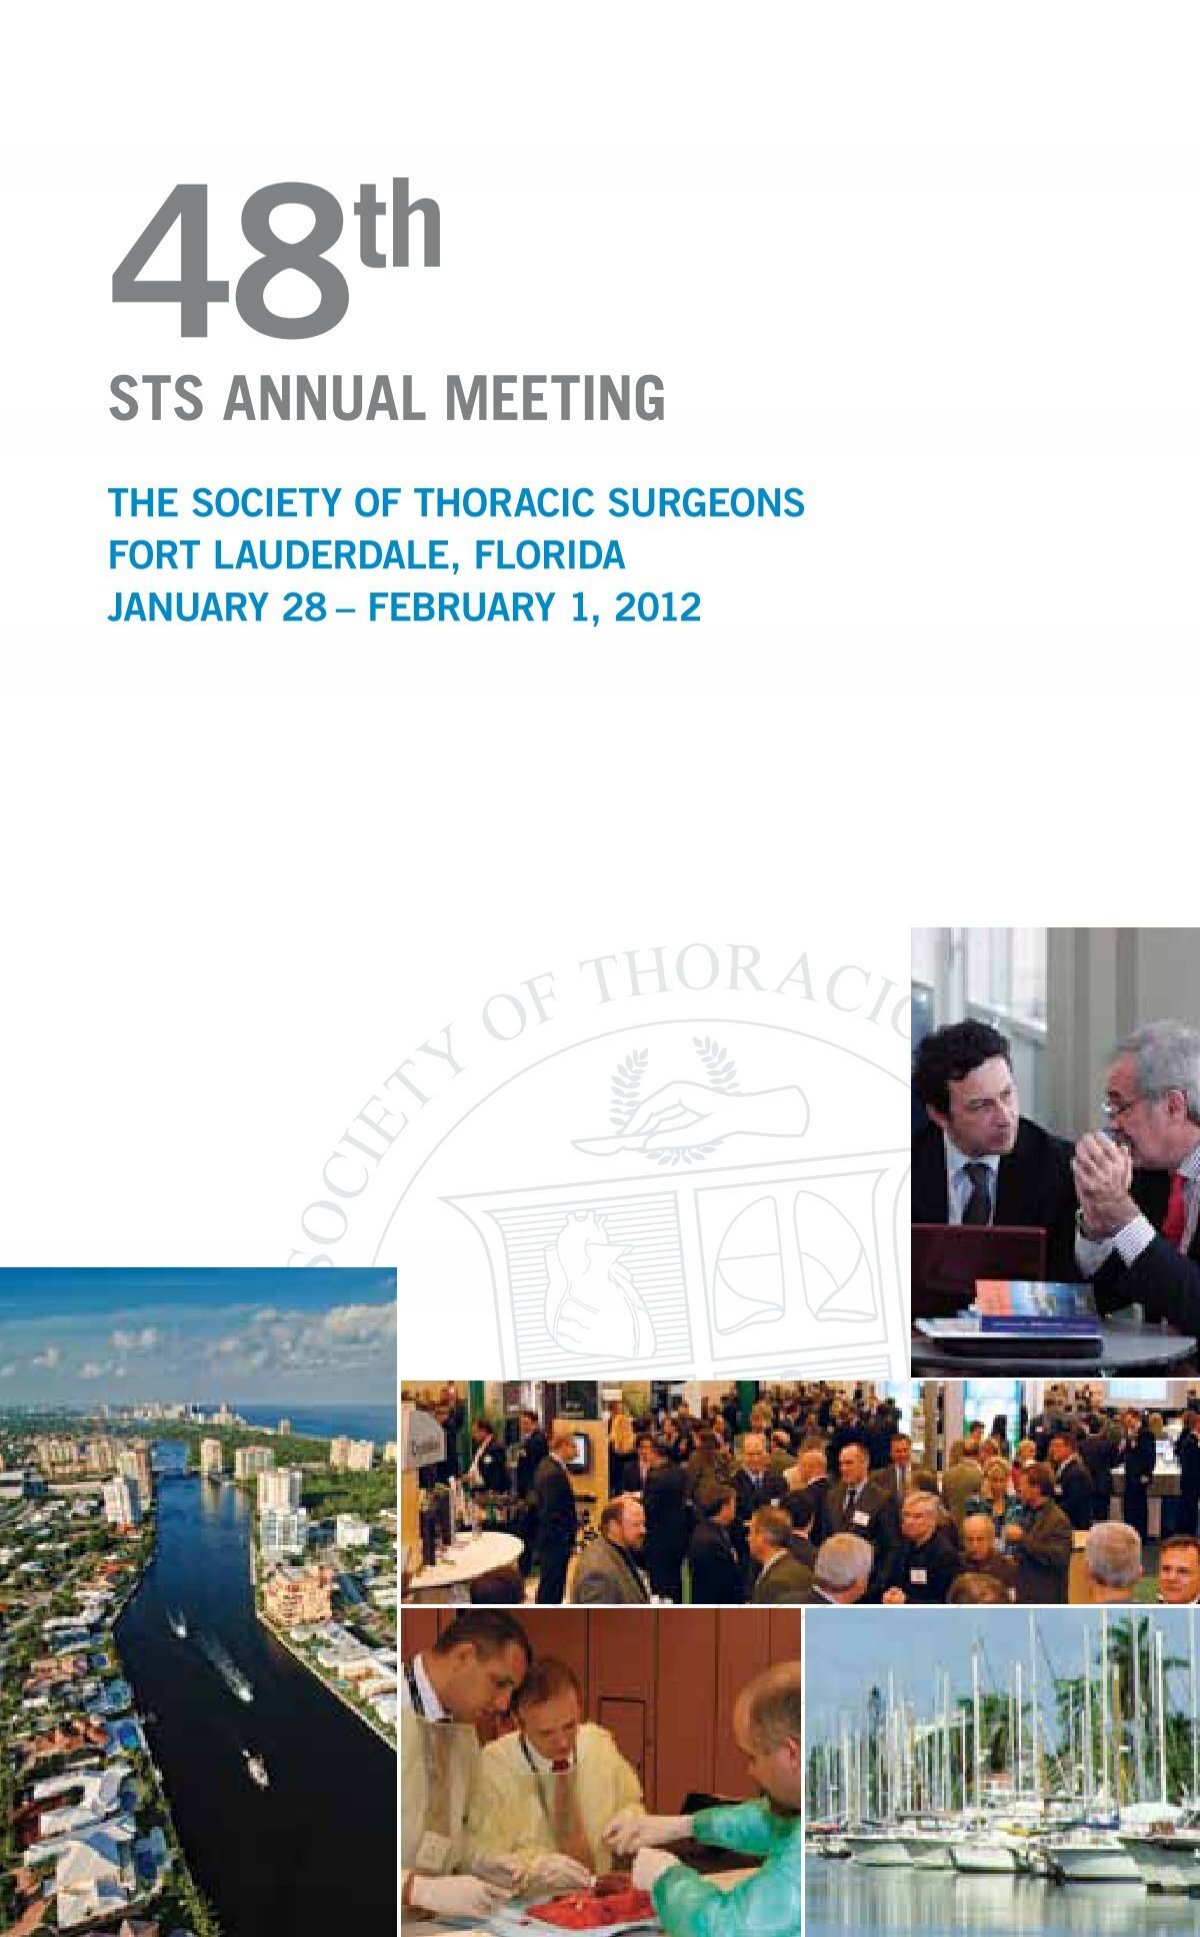 STS ANNUAL MEETING - The of Thoracic Surgeons